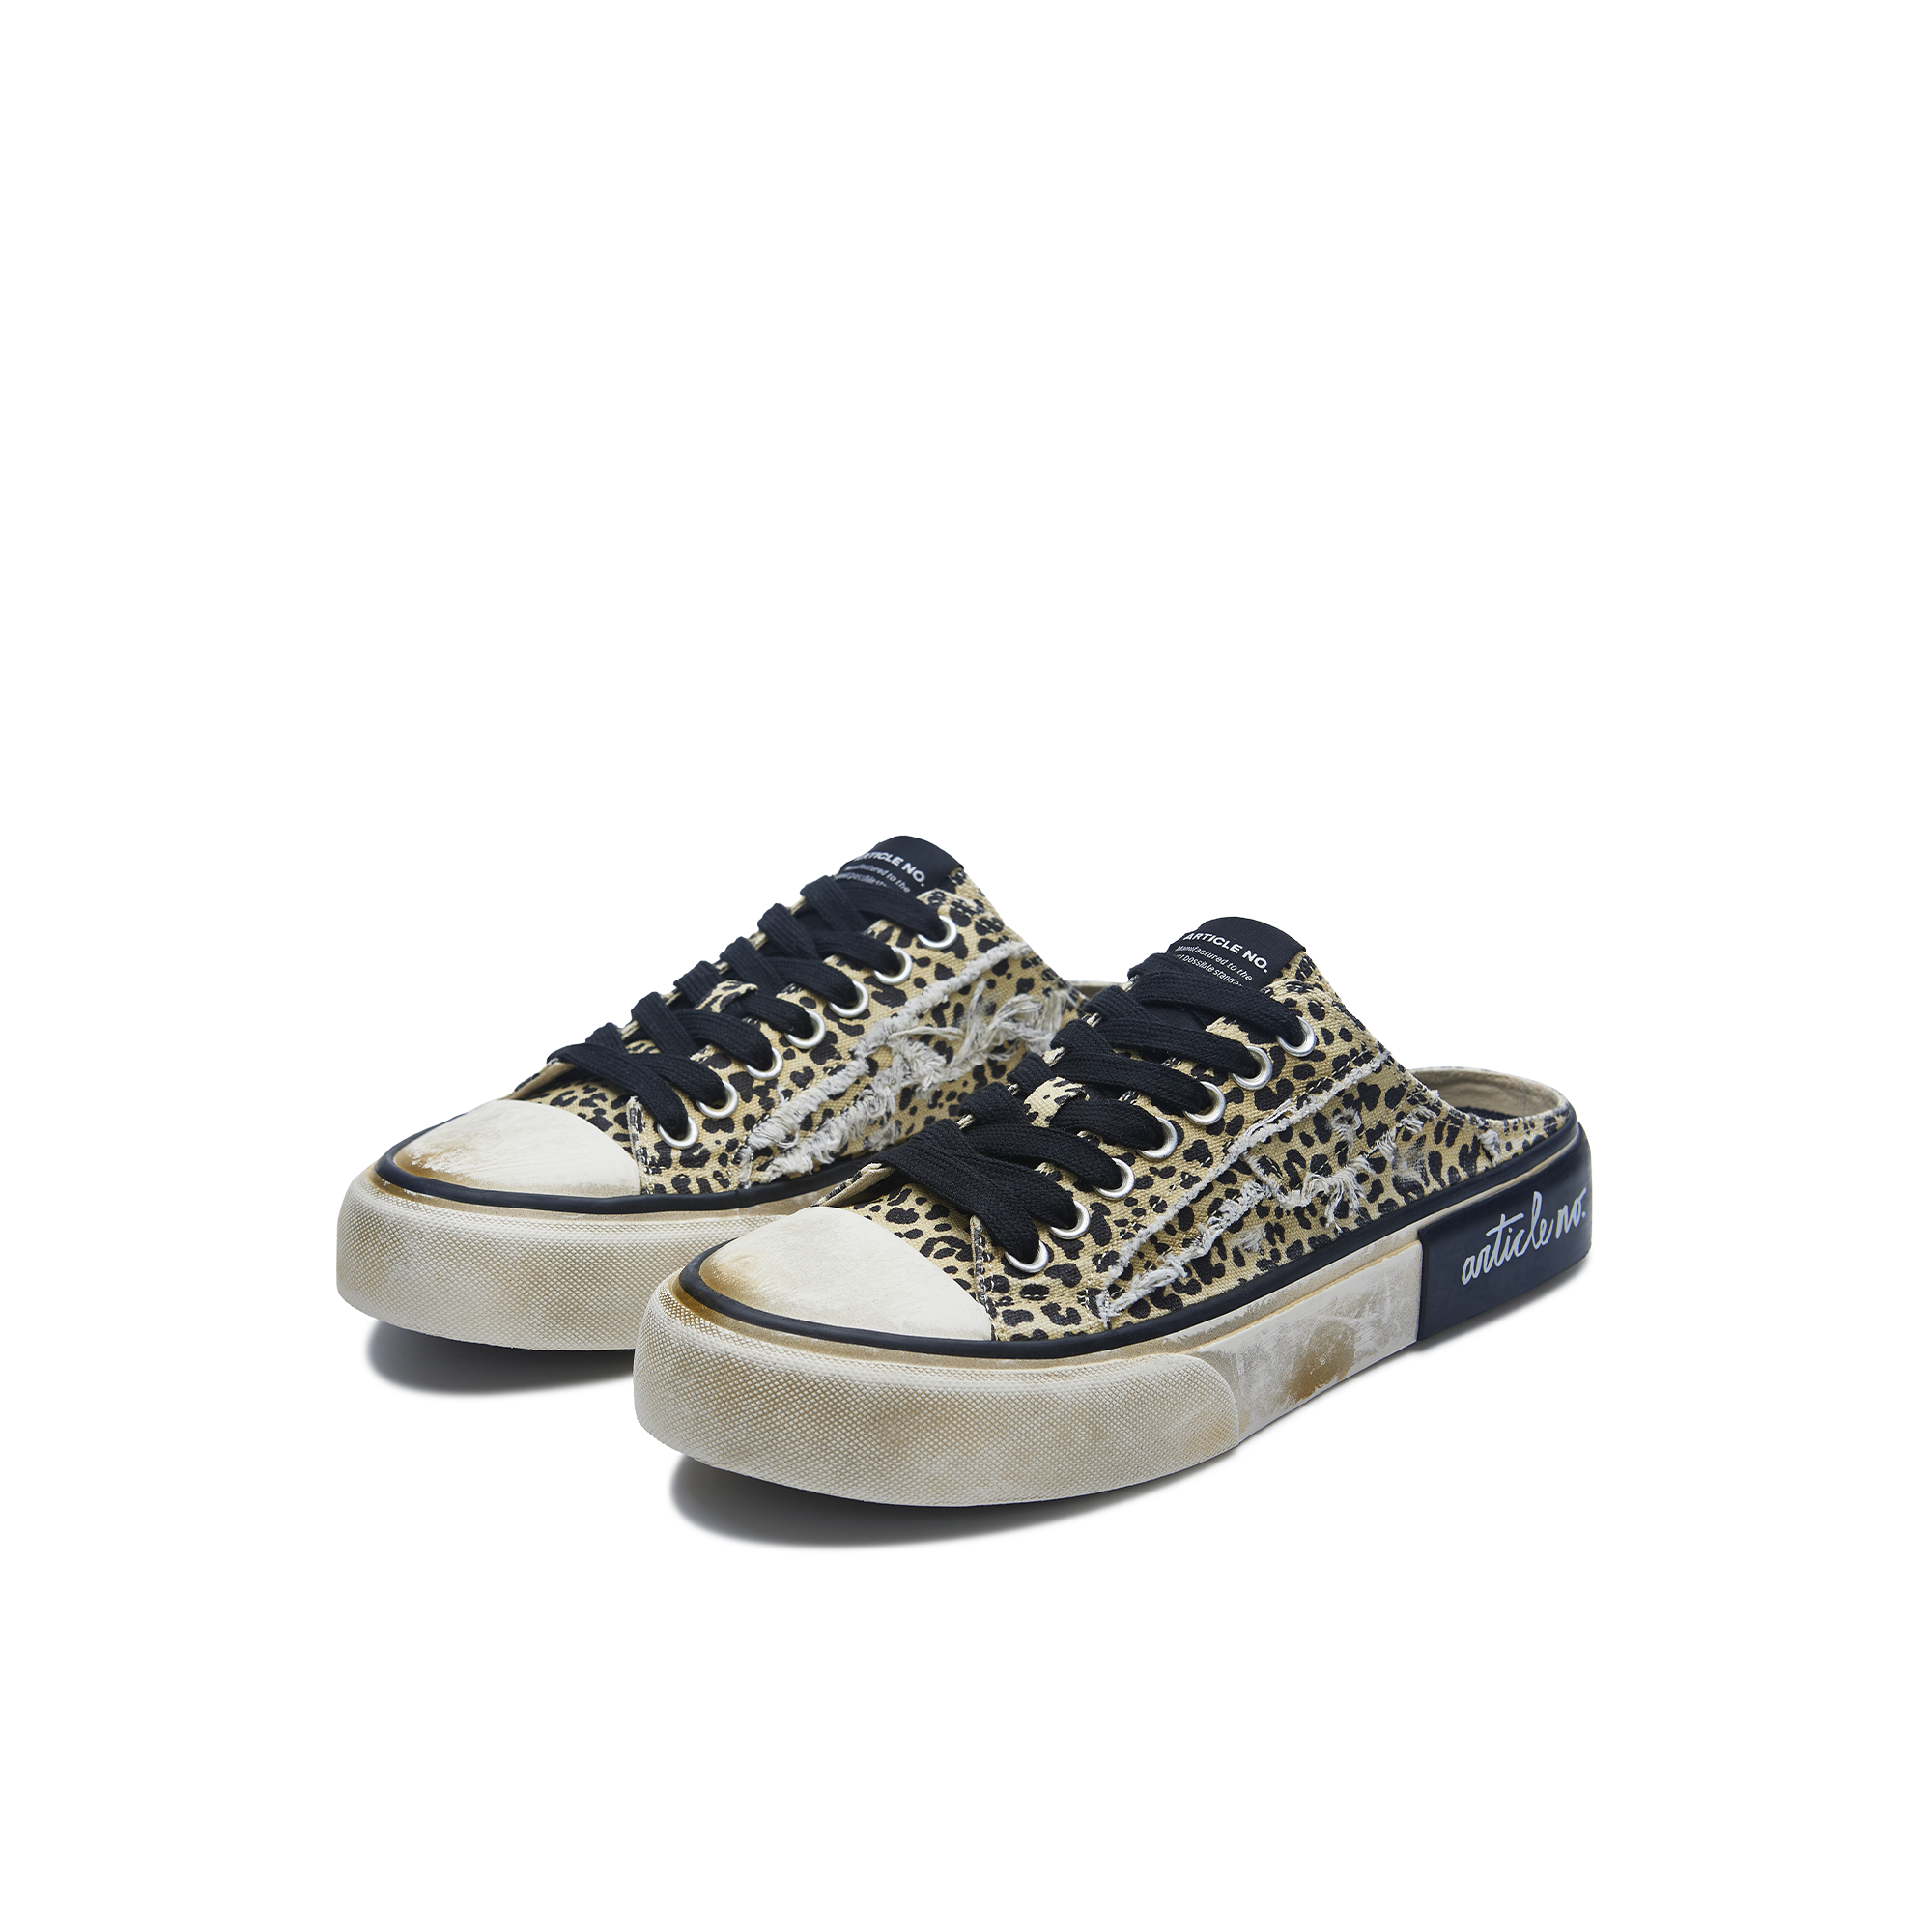 ARTICLE NO. 1012-1011D-23 DIRTY CHEETAH DIRTY CANVAS SLIP-ON MULE